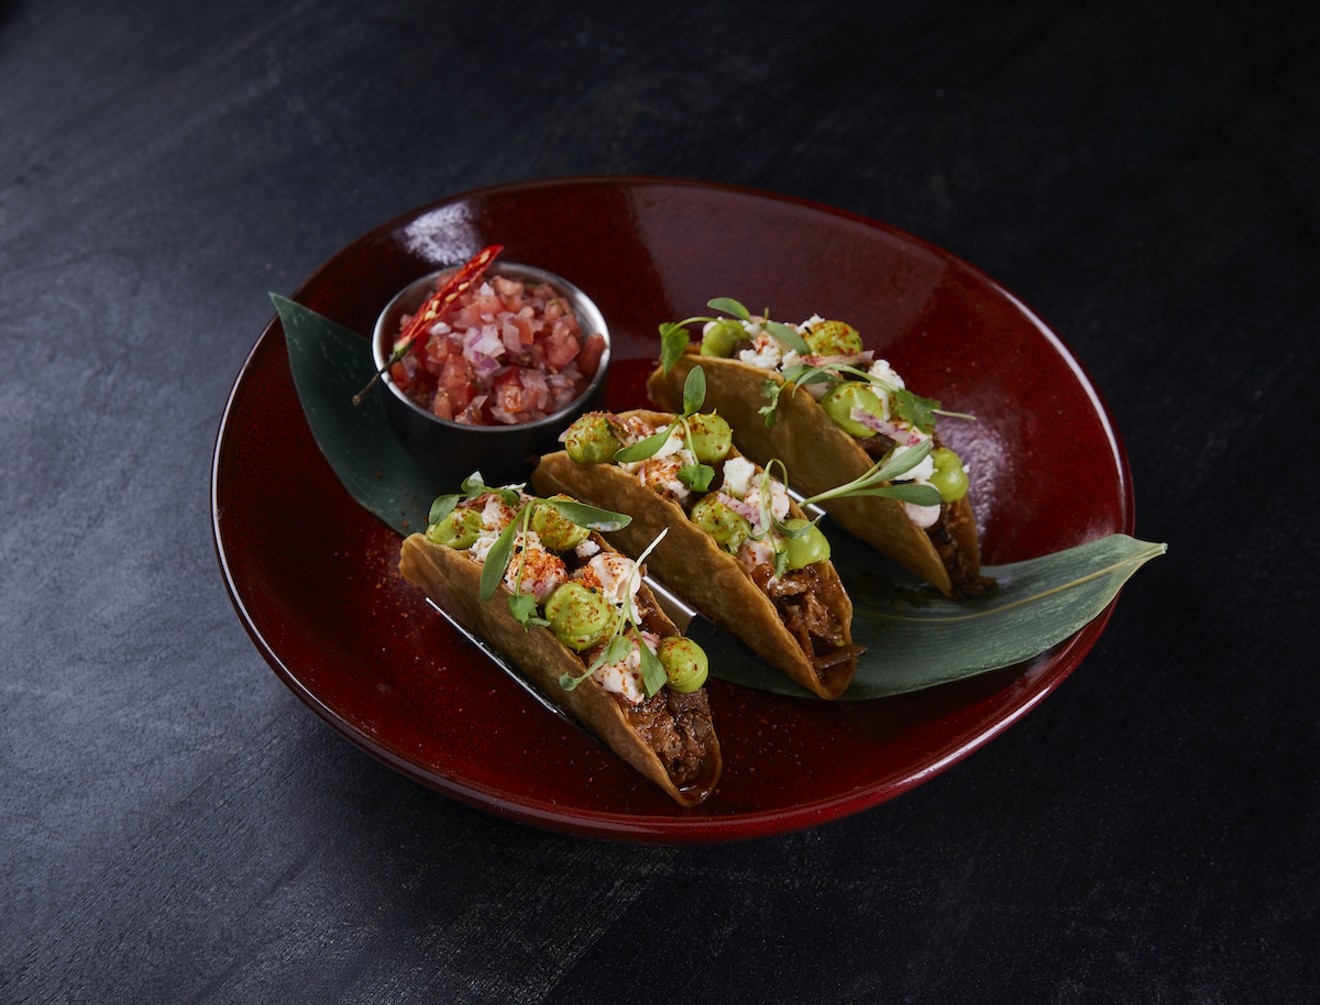 Barbecue pork taquitos at Ch'i, now open at Brickell City Centre.